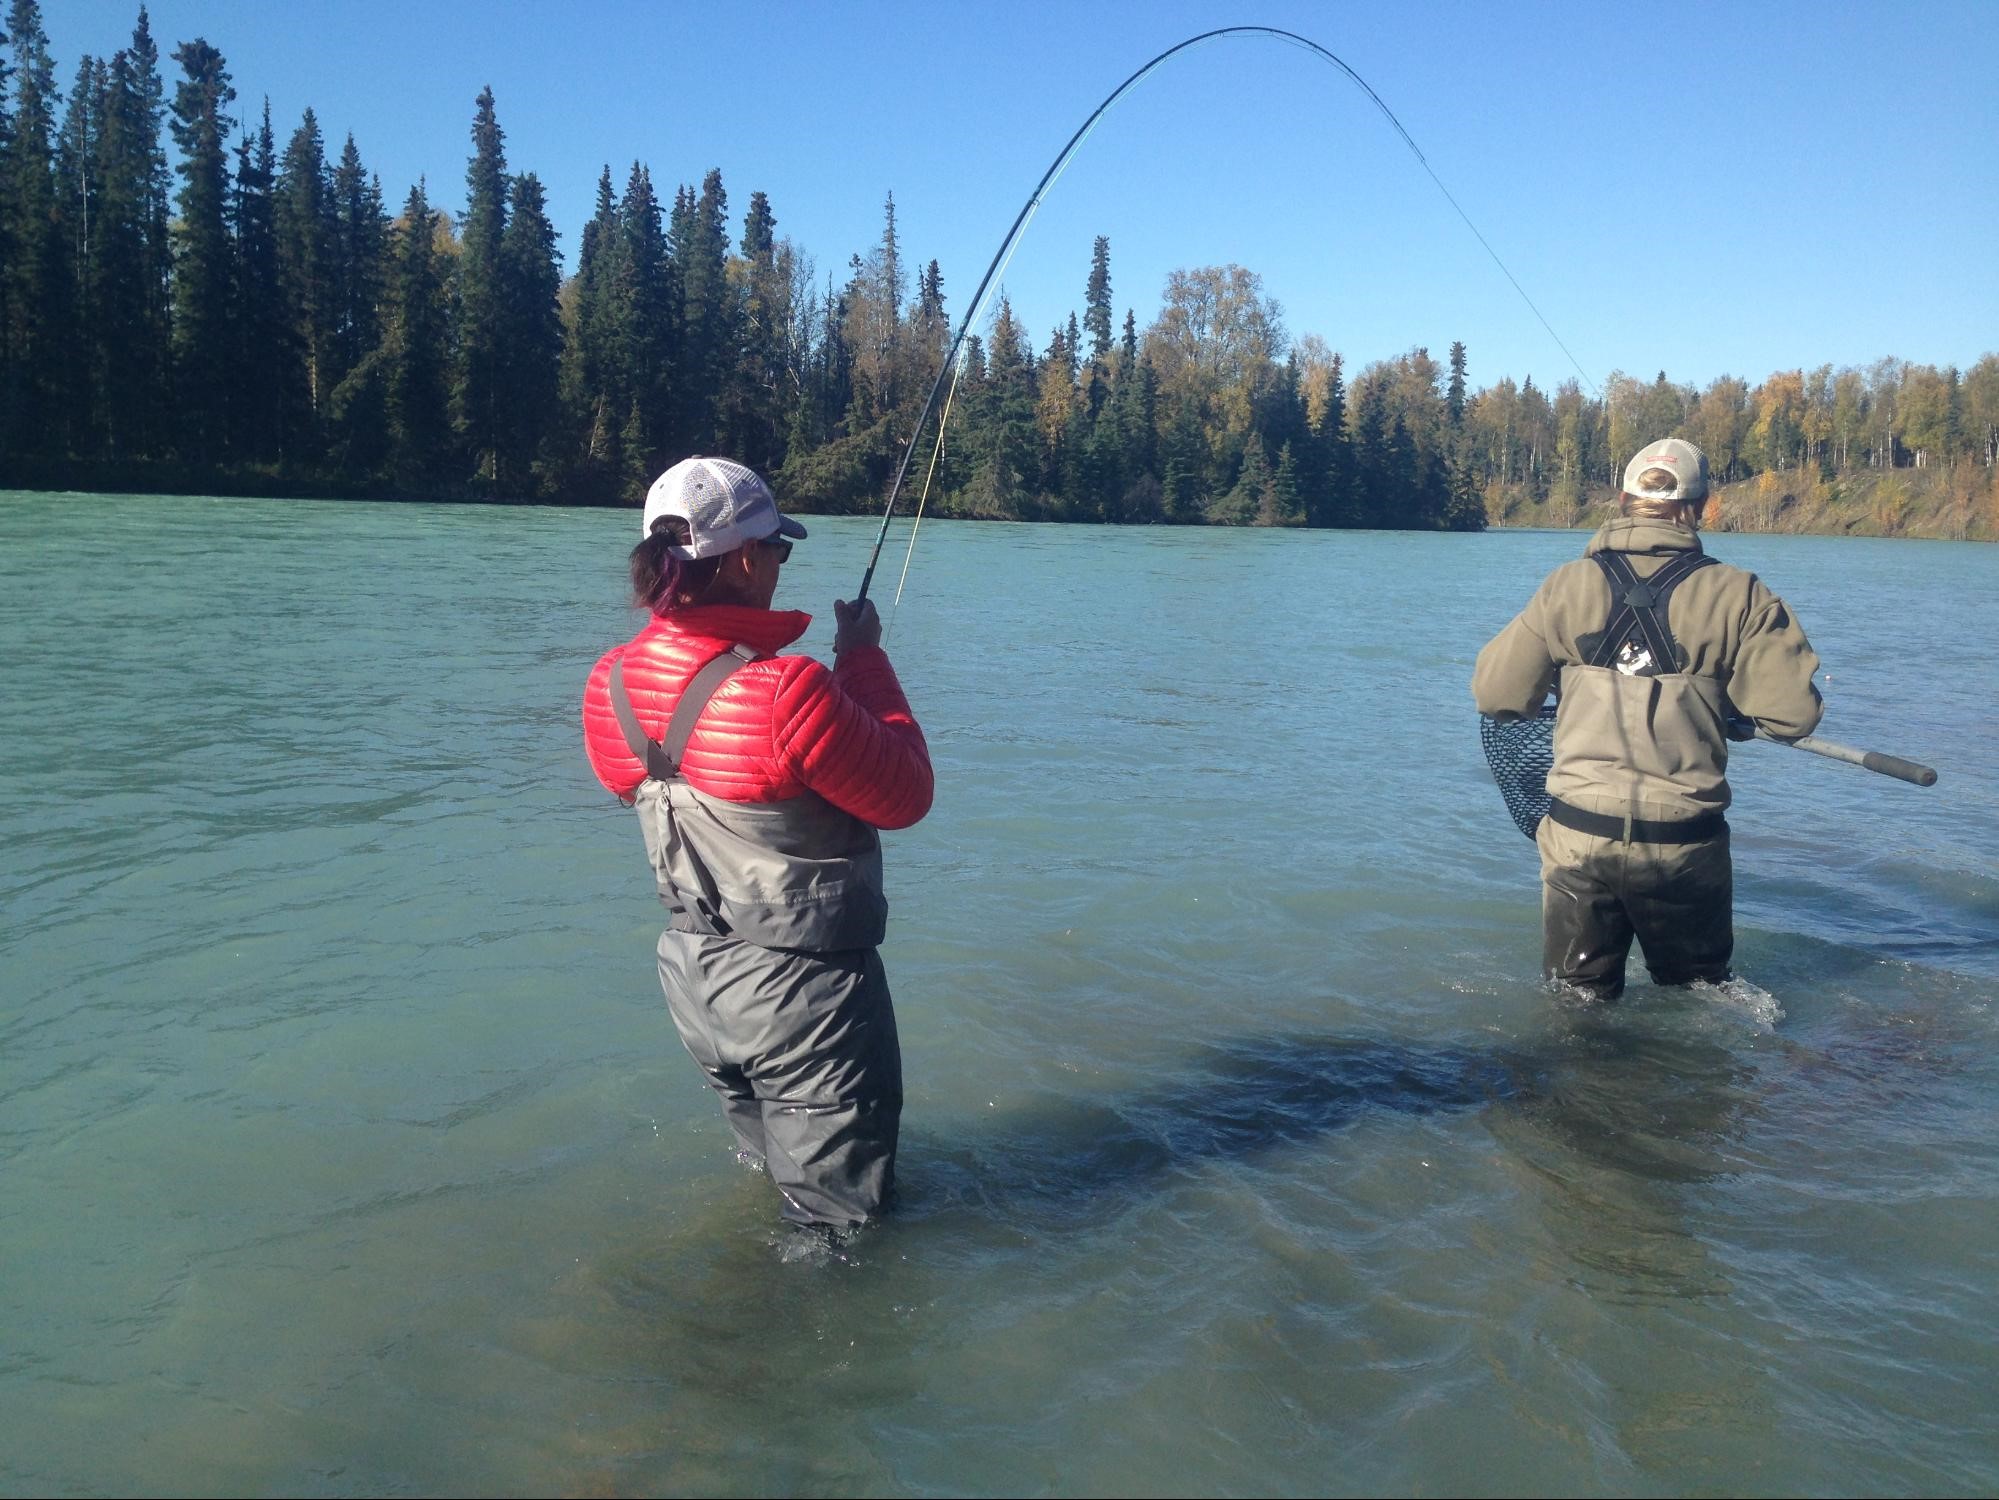 Angler hooked up and guide netting fish